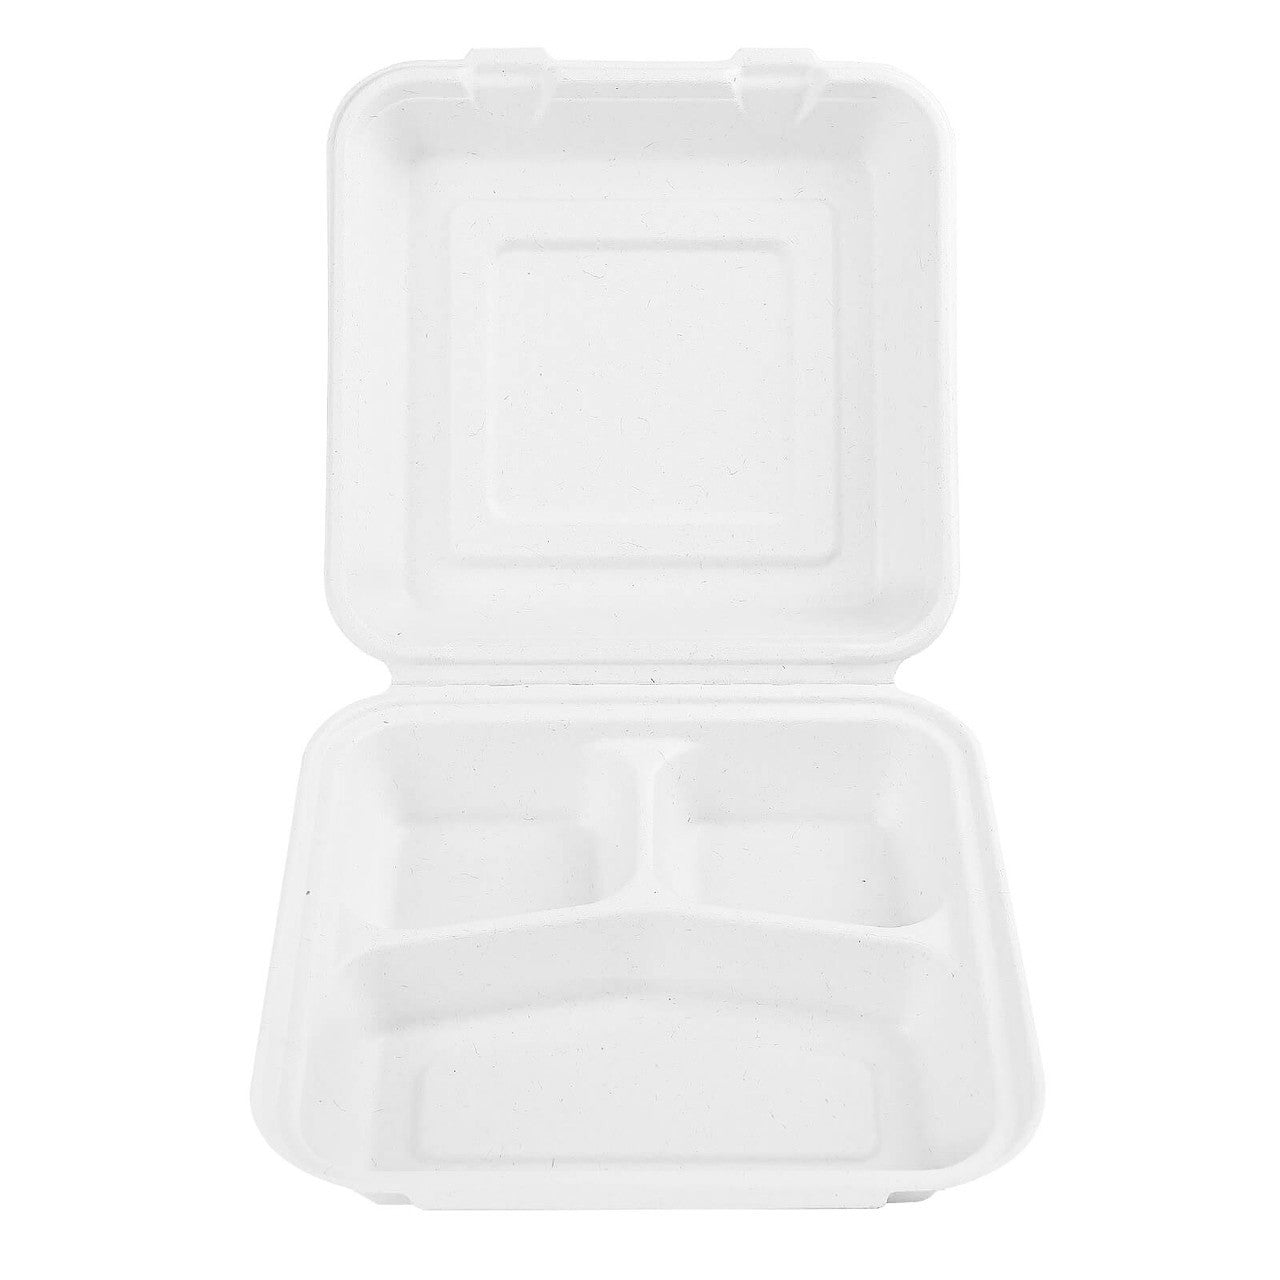 Sample 10"x10"x3" Clamshell To-go Containers 3 Compartment